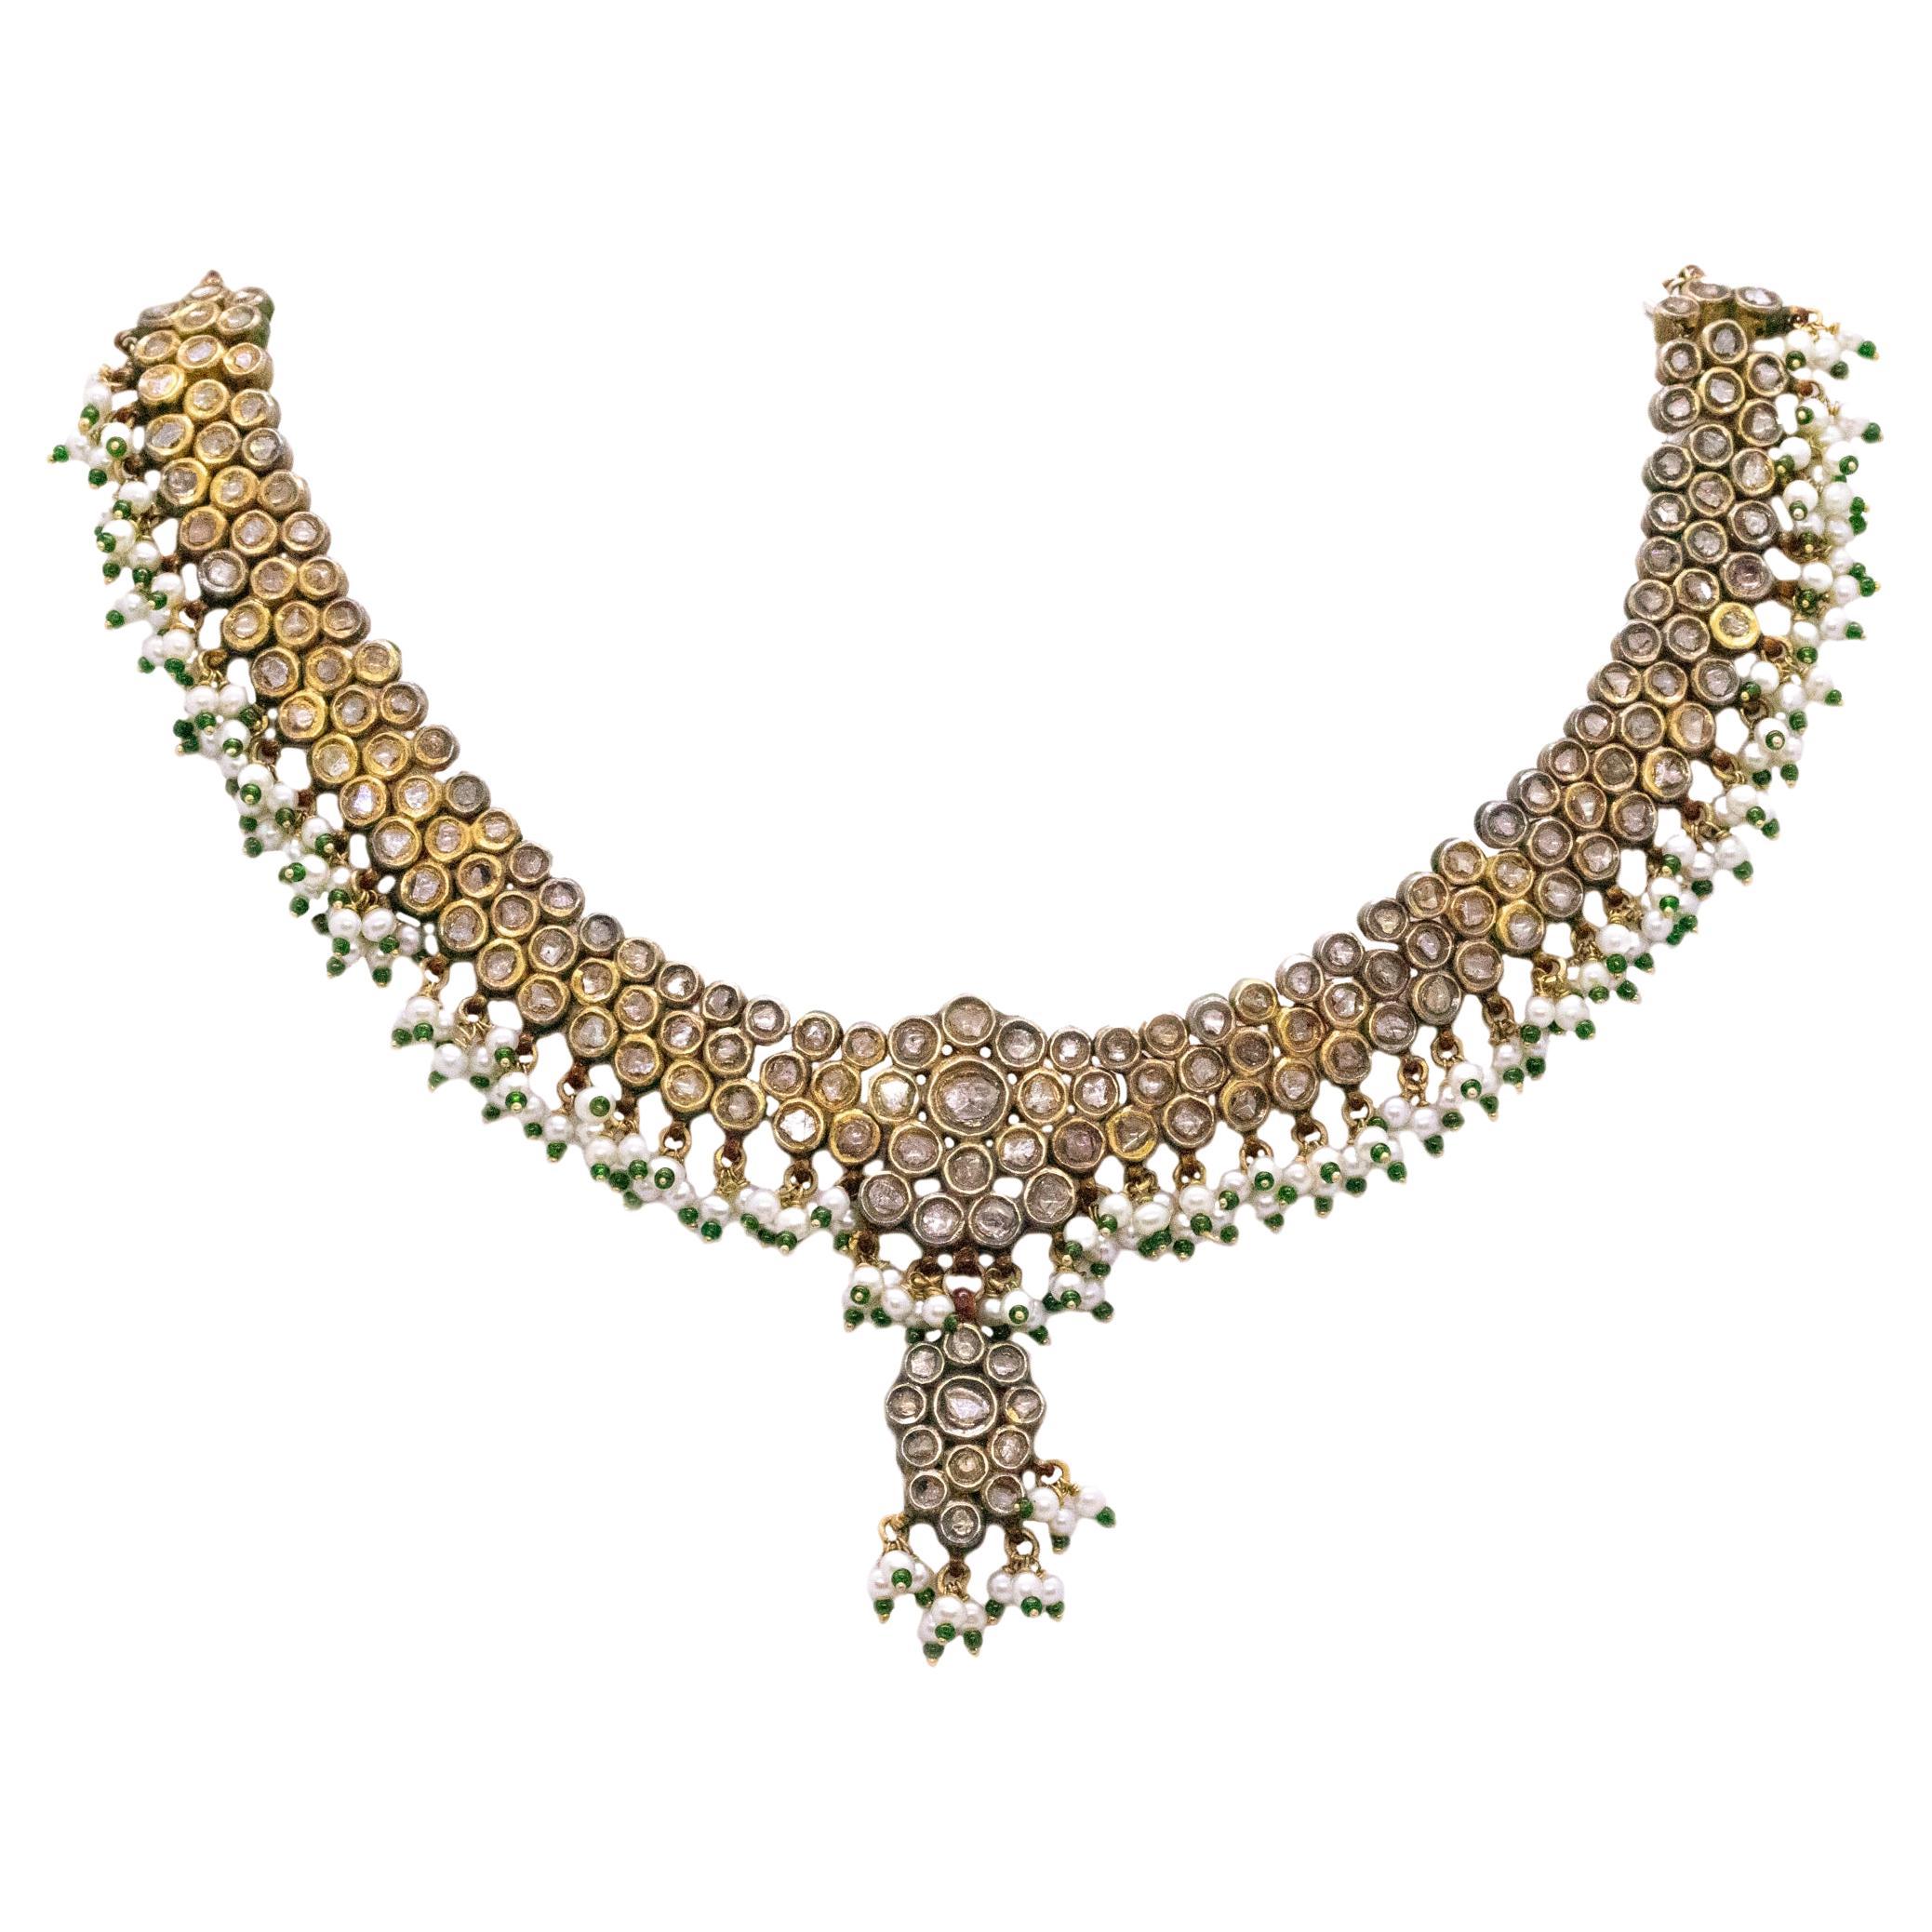 Indian Mughal Court Jeweled Necklace 21Kt Gold 32.55 Cts Diamonds Emerald Pearls